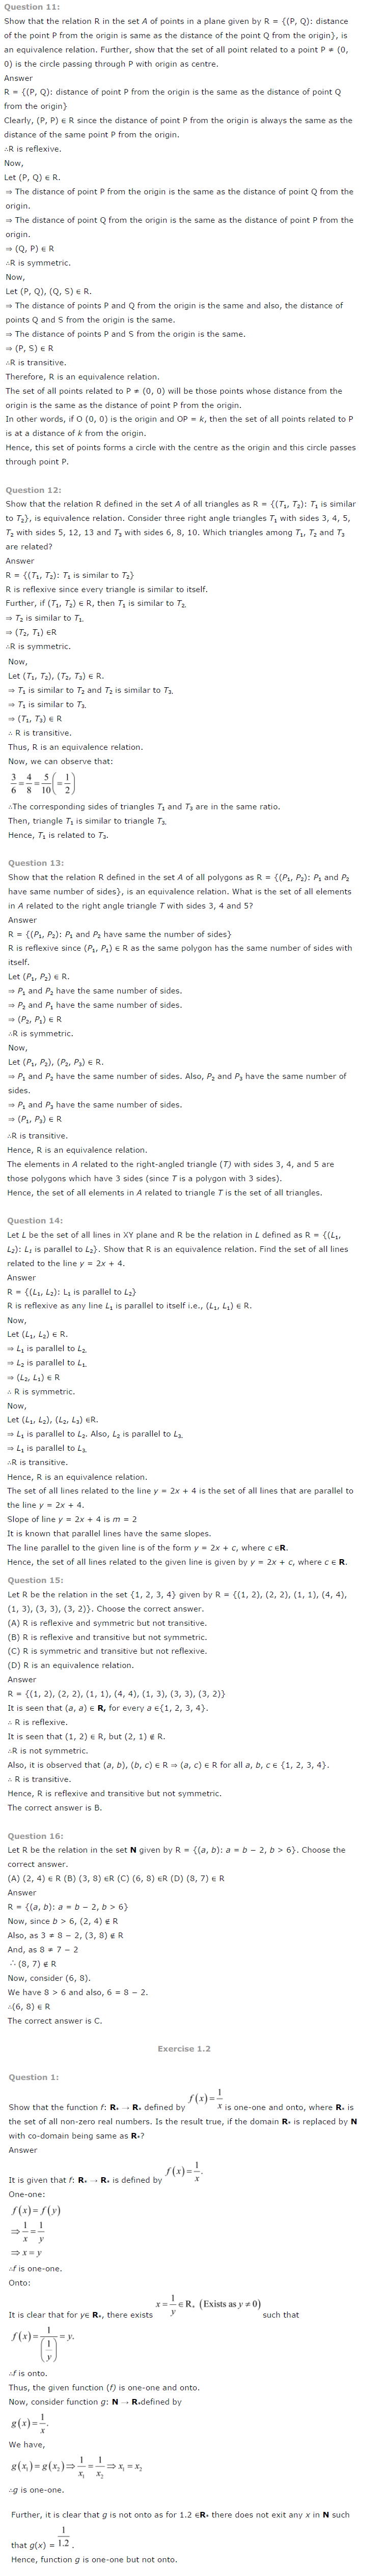 NCERT Solutions For Class 12 Maths Chapter 1 Relations and Functions 3